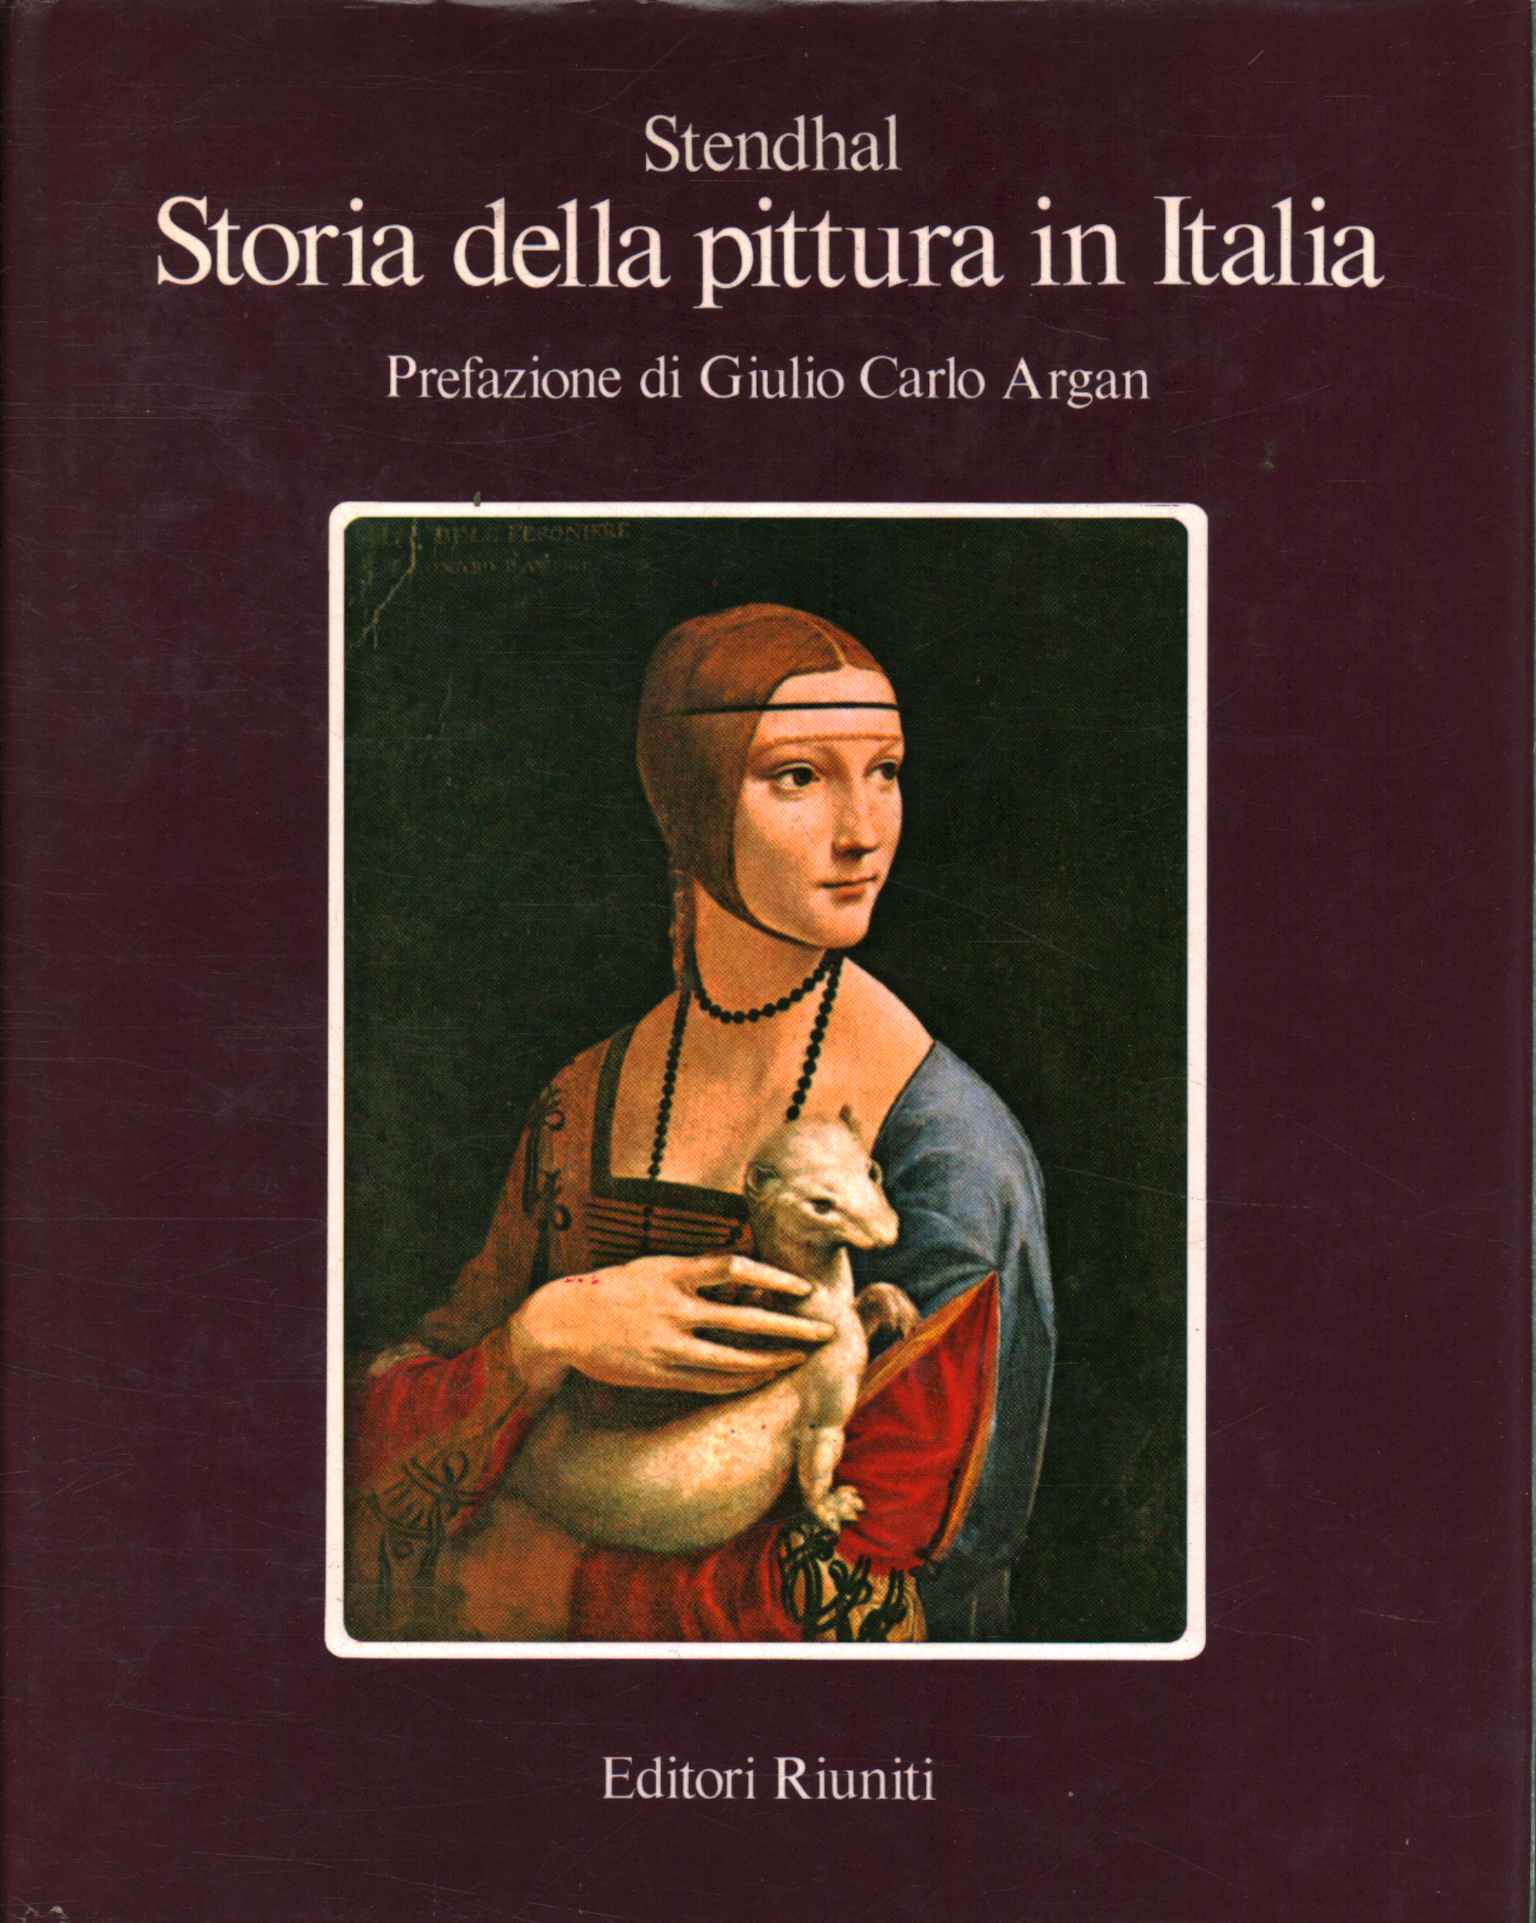 History of painting in Italy